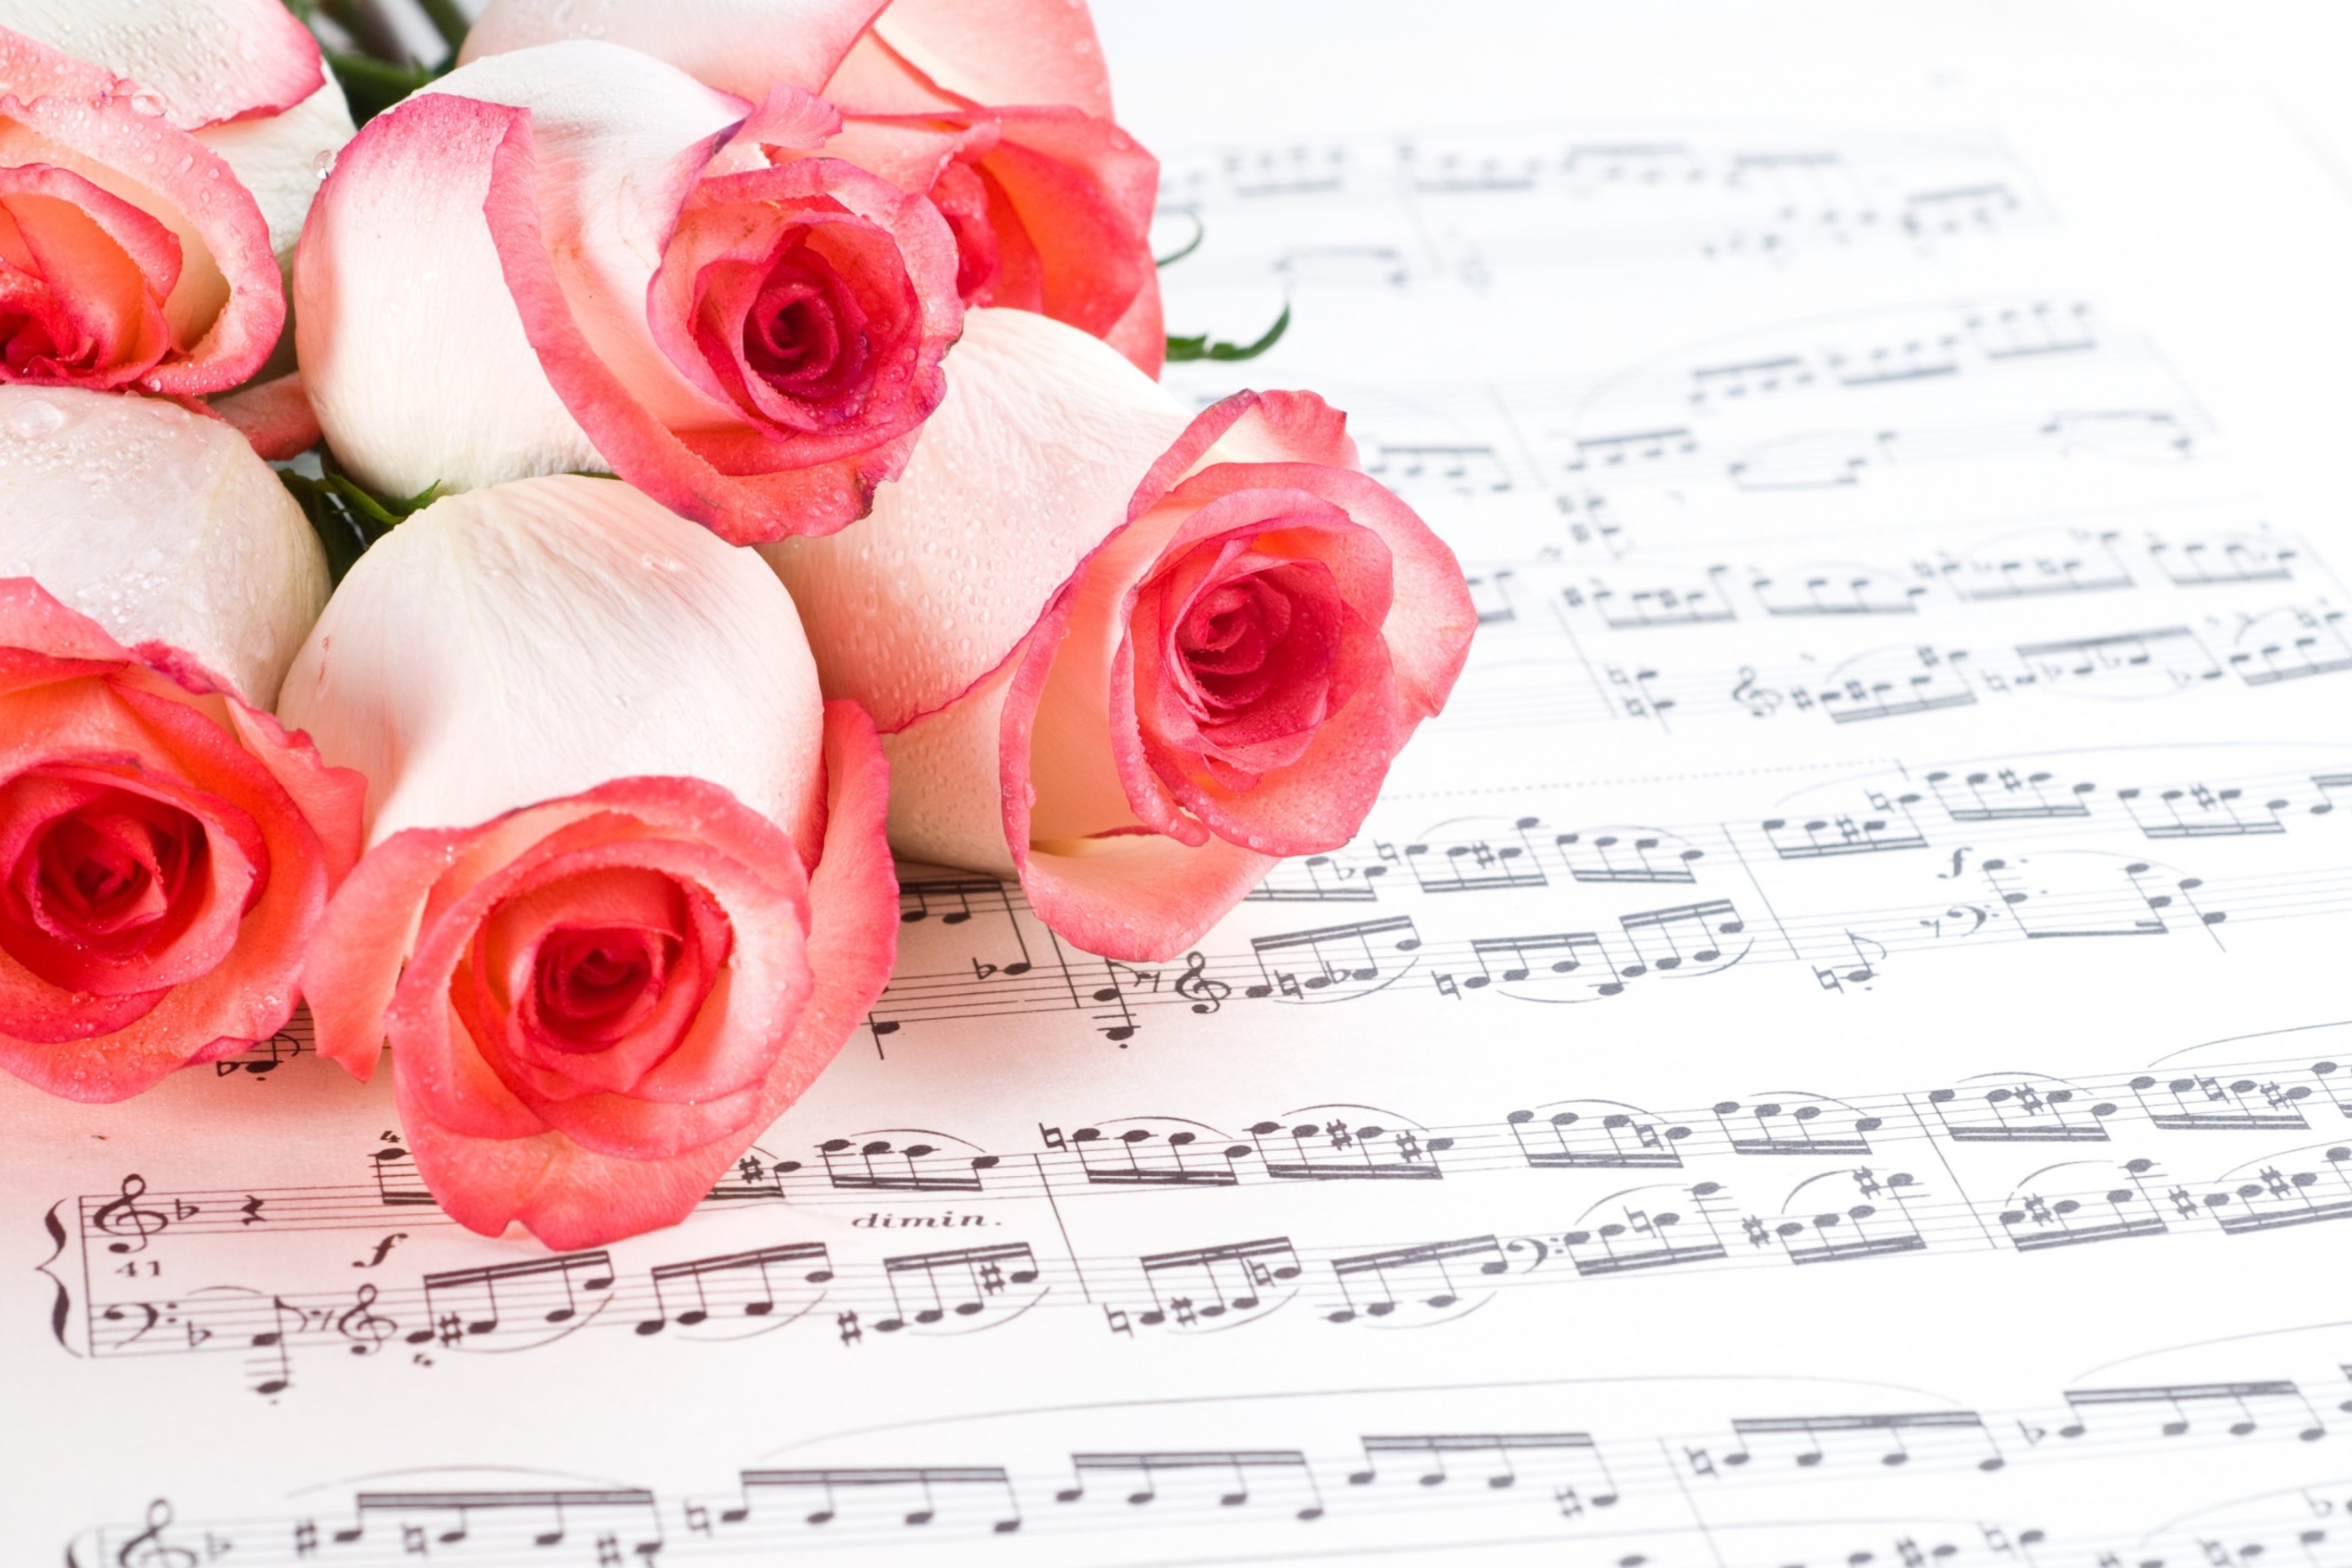 Flowers And Music wallpaper 2880x1920